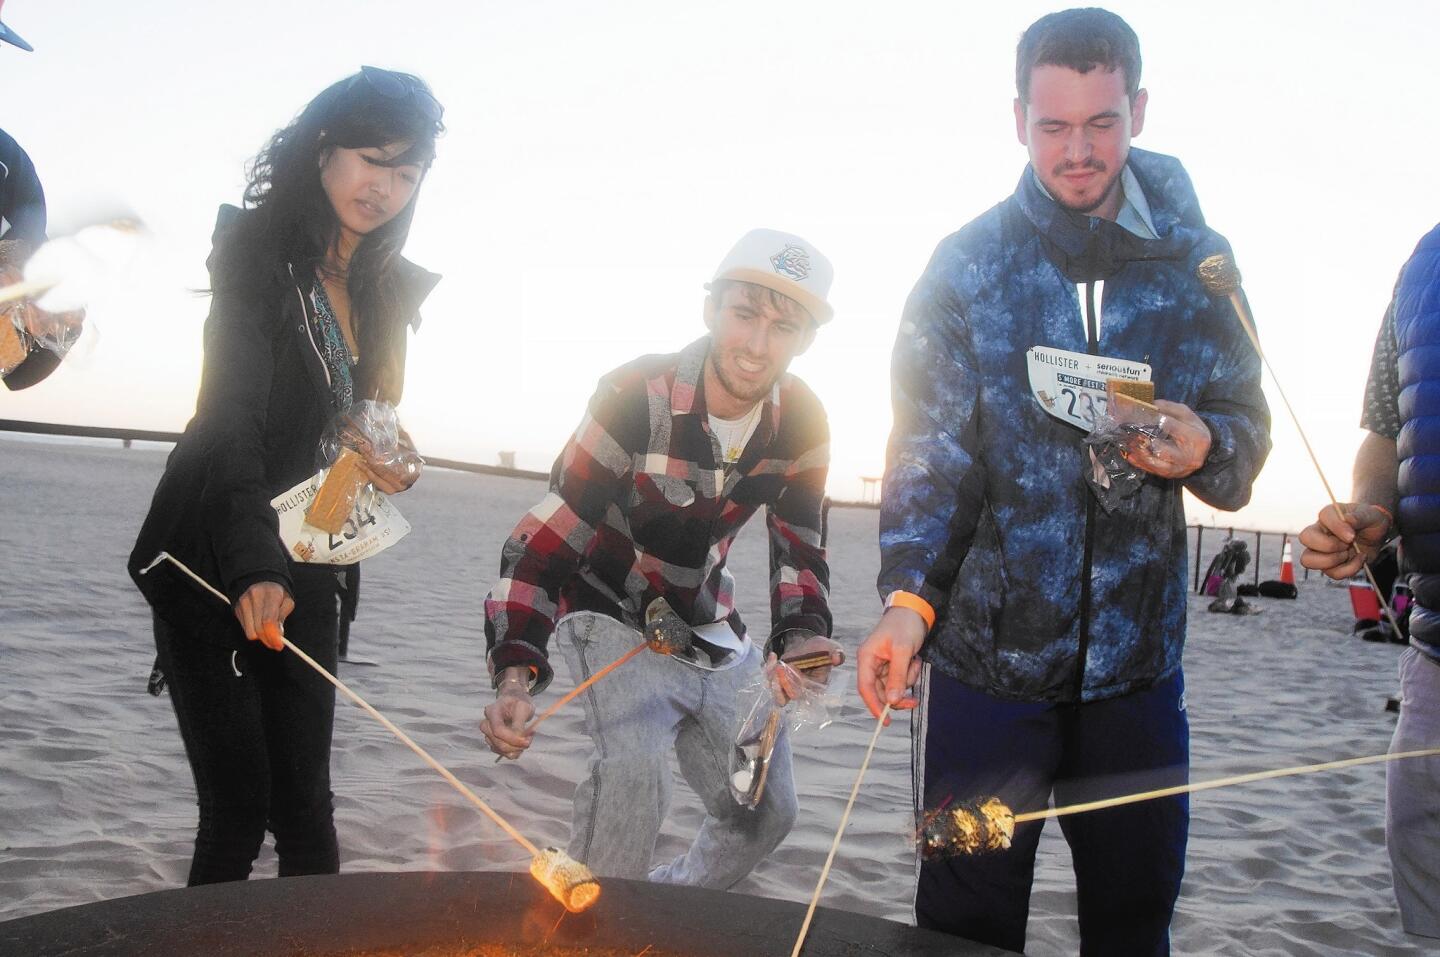 From left, Nini Almero, Blake Ducote and Max Wafel attempt to break the world record for making the most s'mores at once in Huntington Beach Thursday evening.